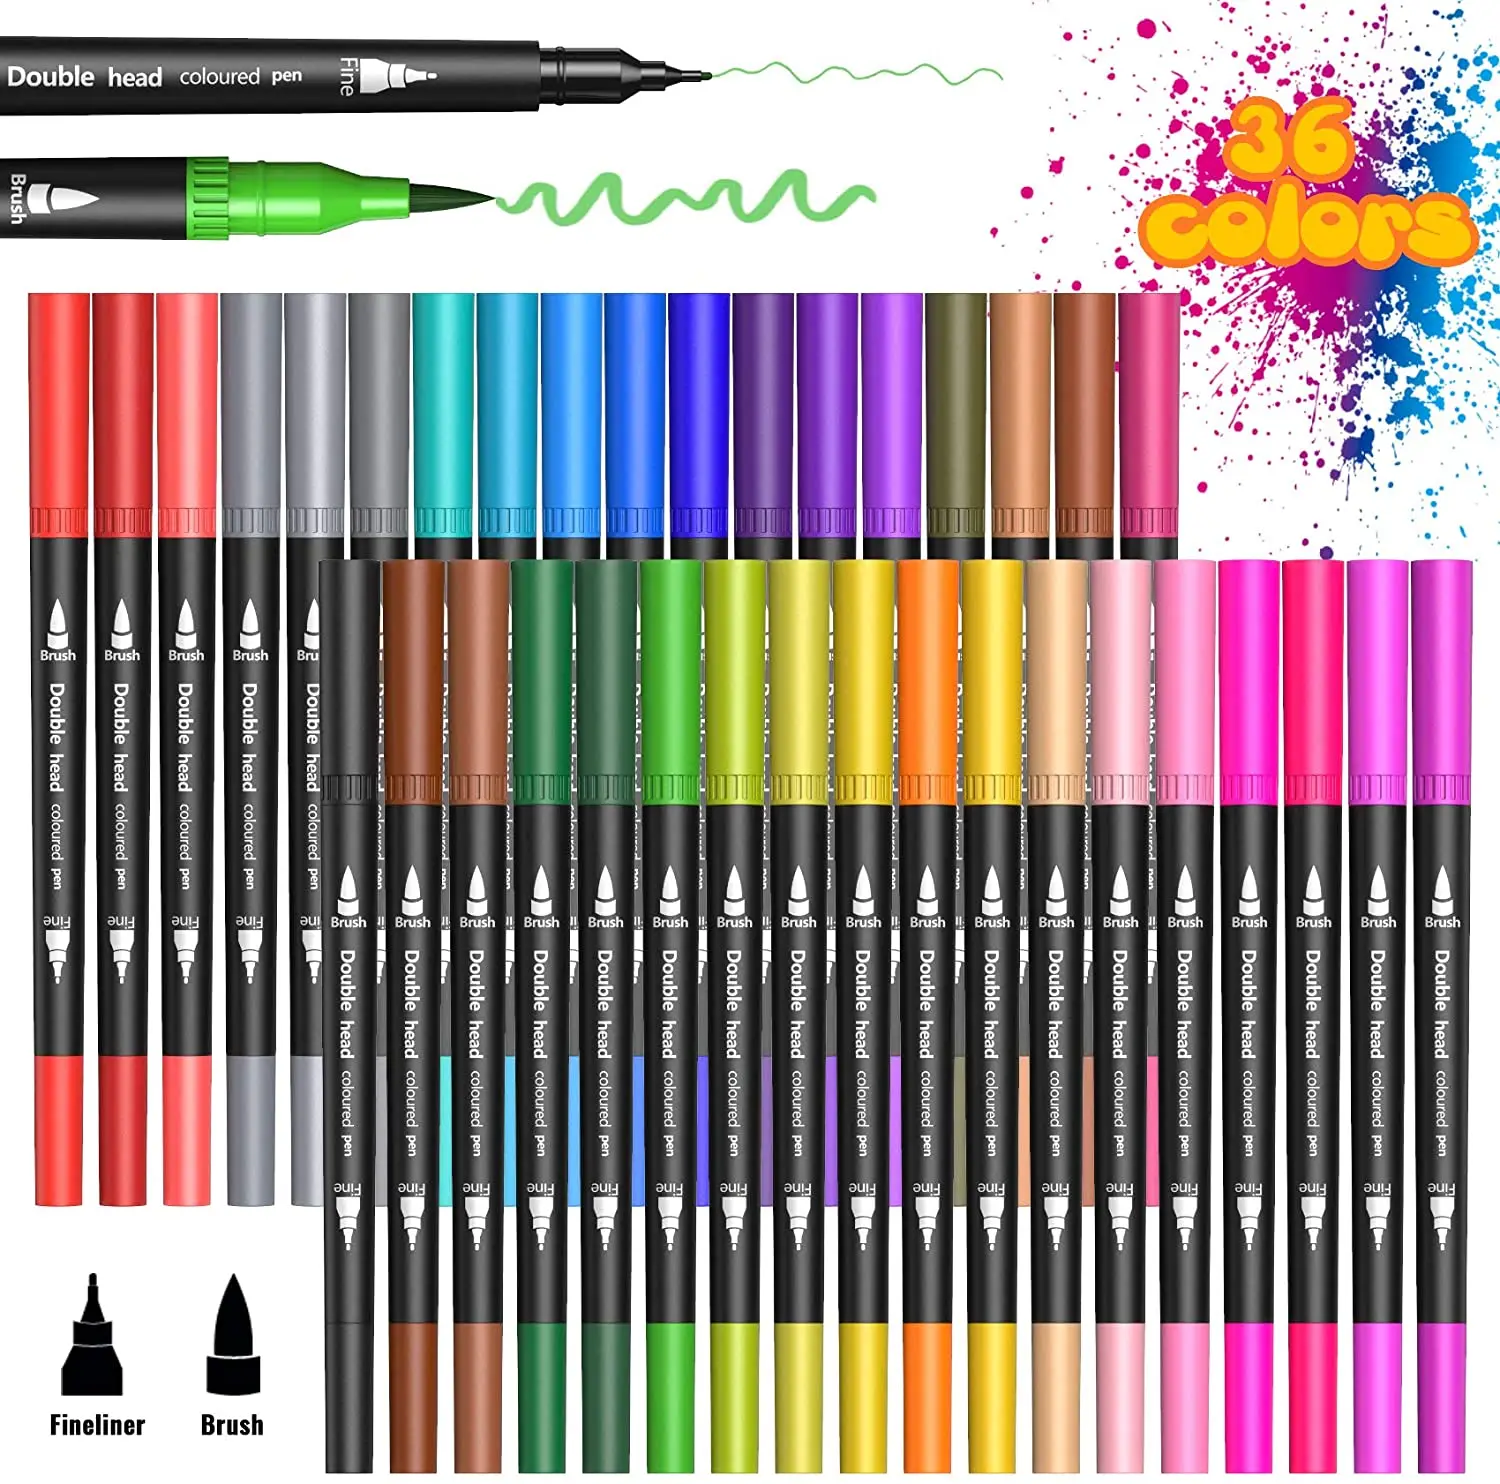 36 24 12 Colour Double Felt Tip Pens Watercolour Marker Pens,Art Colouring Pens Fine Tip Brush Markers for Adult Student Drawing 10 pcs set watercolor painting brushes silver gray pens pointed school student drawing brush pen adult beginner art stationery